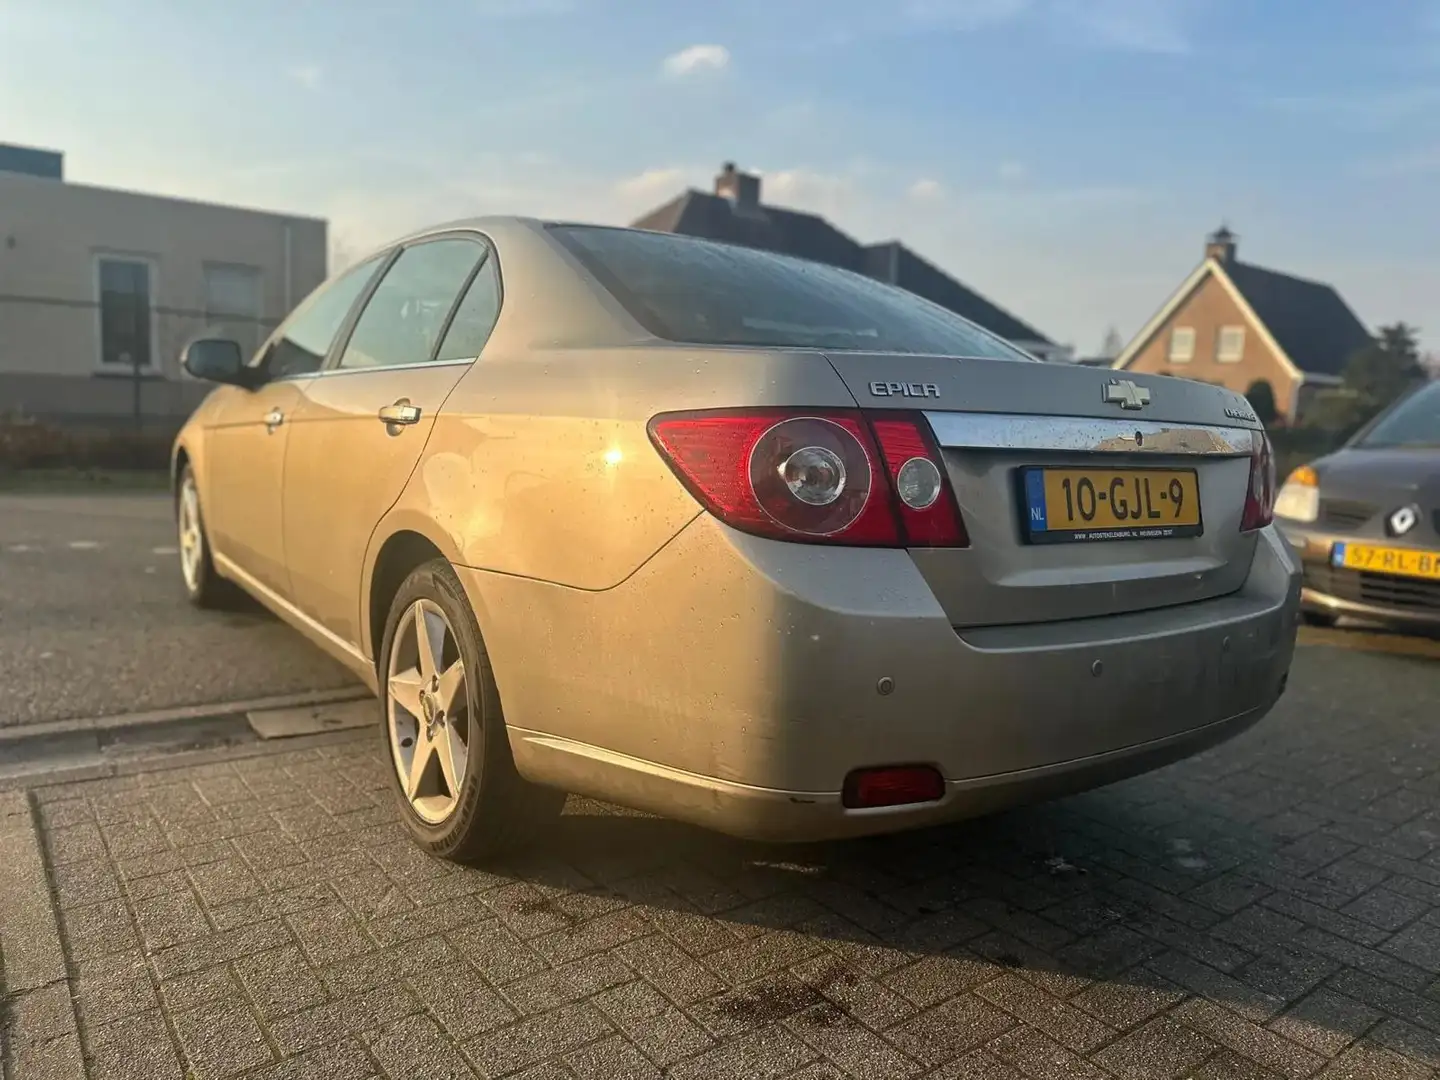 Chevrolet Epica 2.0i Executive Limited Edition Beige - 2